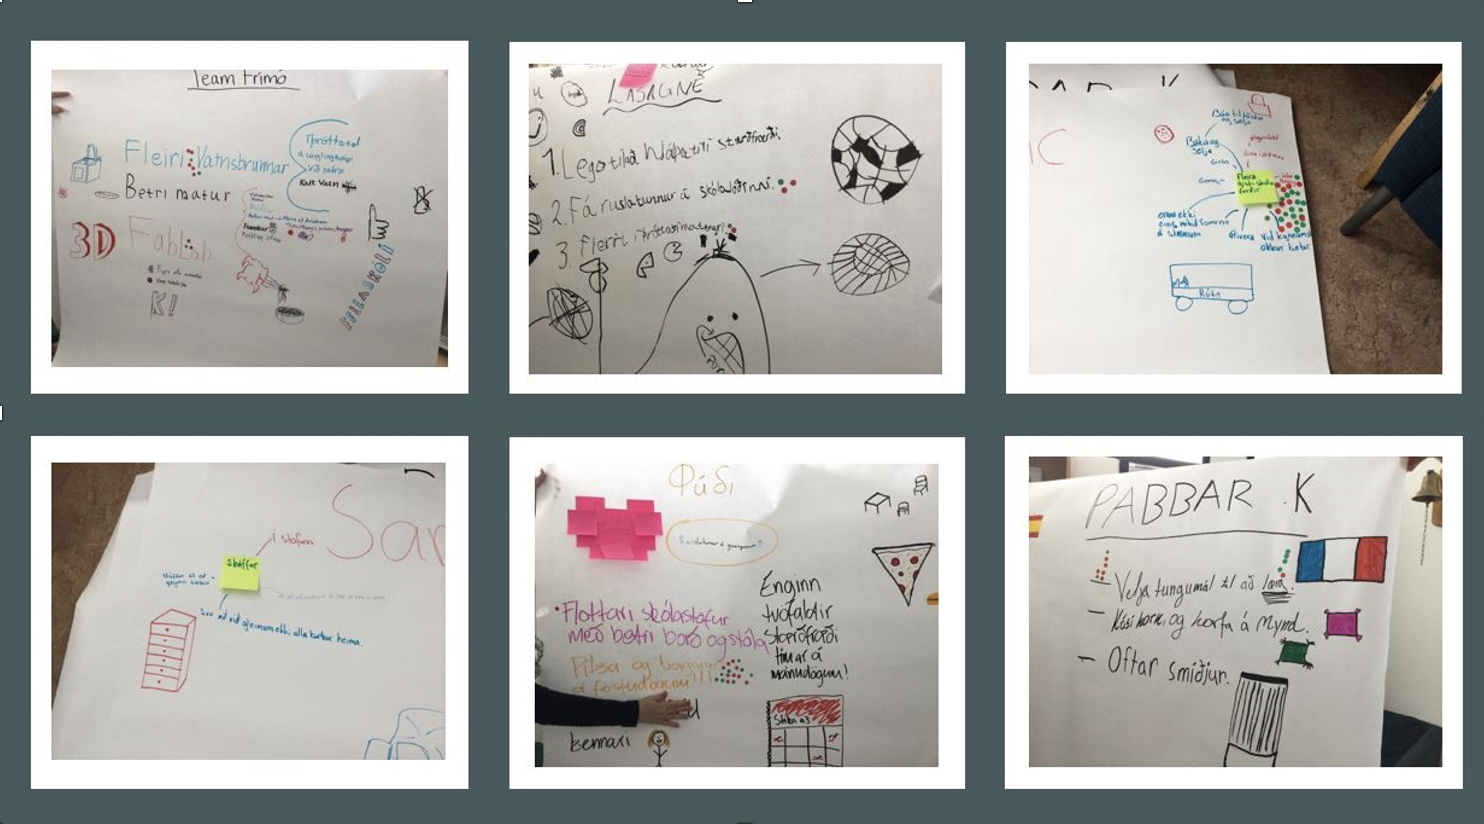 A series of six close-up images of some of the ideas the learners expressed during the Action Lab using drawings and text on posters.